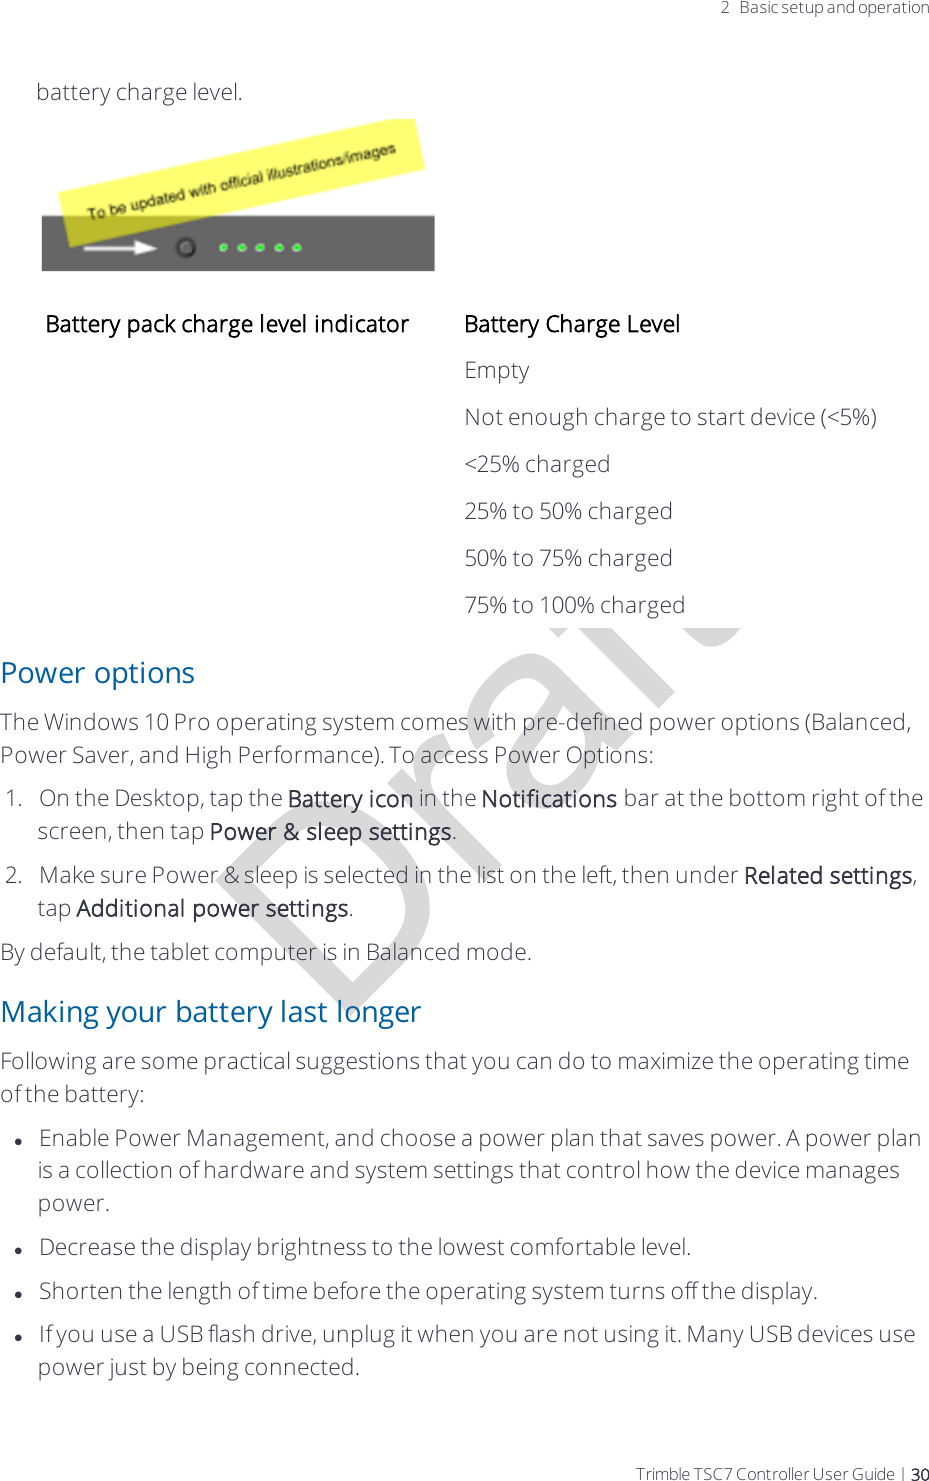 Draft2 Basic setup and operationbattery charge level.Battery pack charge level indicator Battery Charge Level Empty Not enough charge to start device (&lt;5%) &lt;25% charged 25% to 50% charged 50% to 75% charged 75% to 100% chargedPower optionsThe Windows 10 Pro operating system comes with pre-defined power options (Balanced, Power Saver, and High Performance). To access Power Options:1.  On the Desktop, tap the Battery icon in the Notifications bar at the bottom right of the screen, then tap Power &amp; sleep settings.2.  Make sure Power &amp; sleep is selected in the list on the left, then under Related settings, tap Additional power settings.By default, the tablet computer is in Balanced mode.Making your battery last longerFollowing are some practical suggestions that you can do to maximize the operating time of the battery:lEnable Power Management, and choose a power plan that saves power. A power plan is a collection of hardware and system settings that control how the device manages power.lDecrease the display brightness to the lowest comfortable level.lShorten the length of time before the operating system turns off the display.lIf you use a USB flash drive, unplug it when you are not using it. Many USB devices use power just by being connected. Trimble TSC7 Controller User Guide | 30